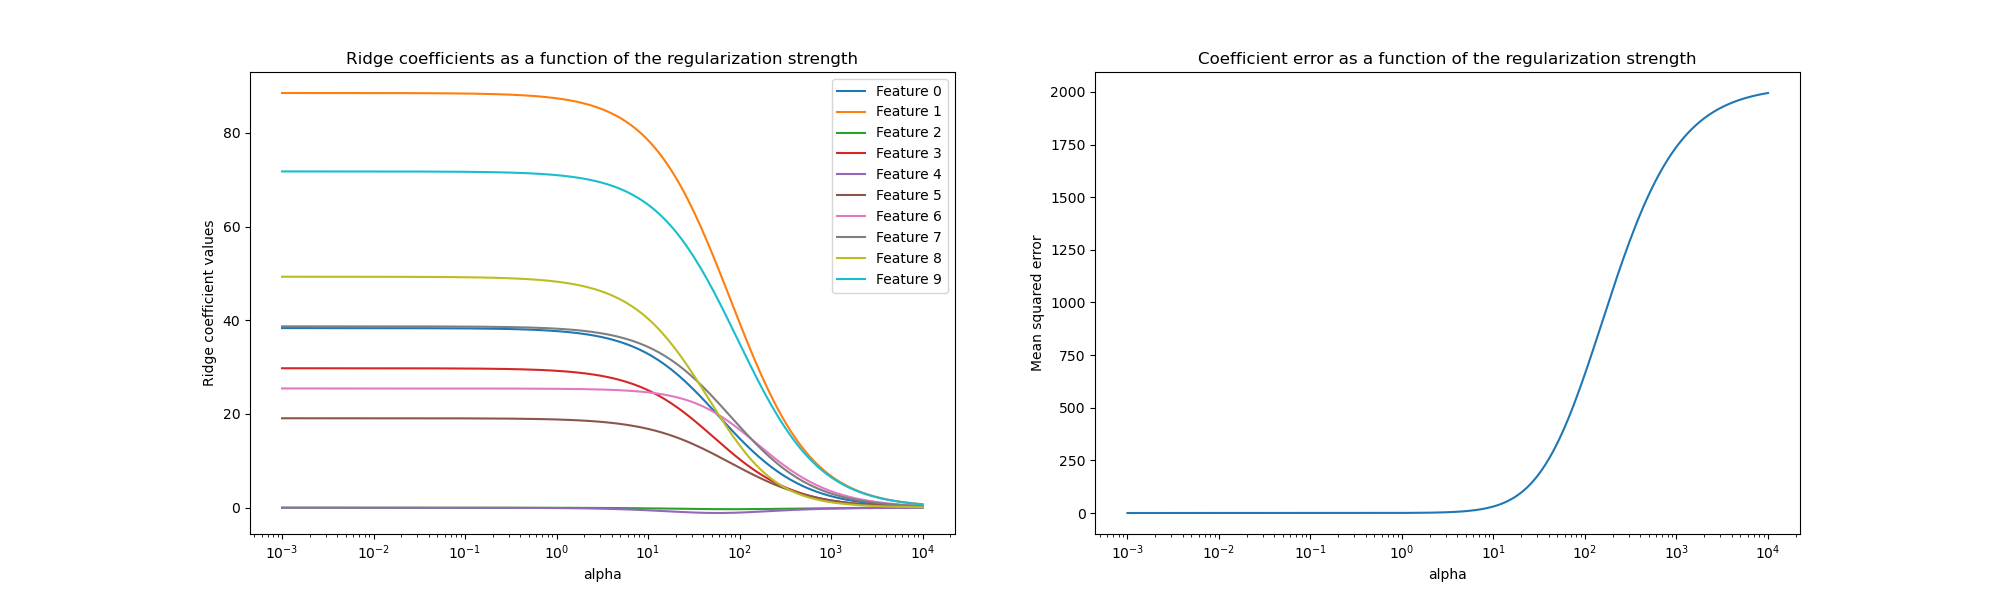 Ridge coefficients as a function of the regularization, Coefficient error as a function of the regularization